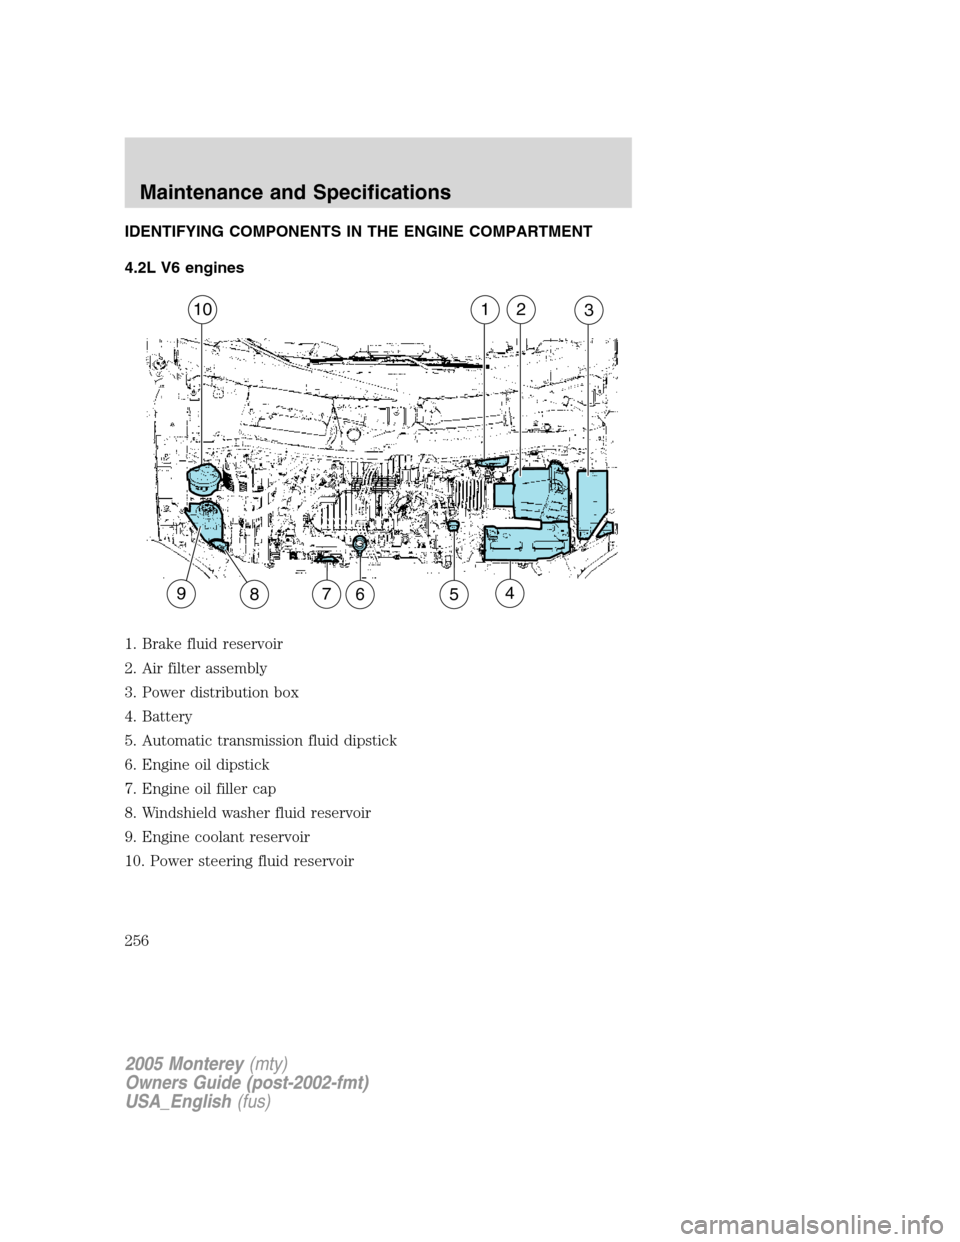 Mercury Monterey 2005  Owners Manuals IDENTIFYING COMPONENTS IN THE ENGINE COMPARTMENT
4.2L V6 engines
1. Brake fluid reservoir
2. Air filter assembly
3. Power distribution box
4. Battery
5. Automatic transmission fluid dipstick
6. Engine